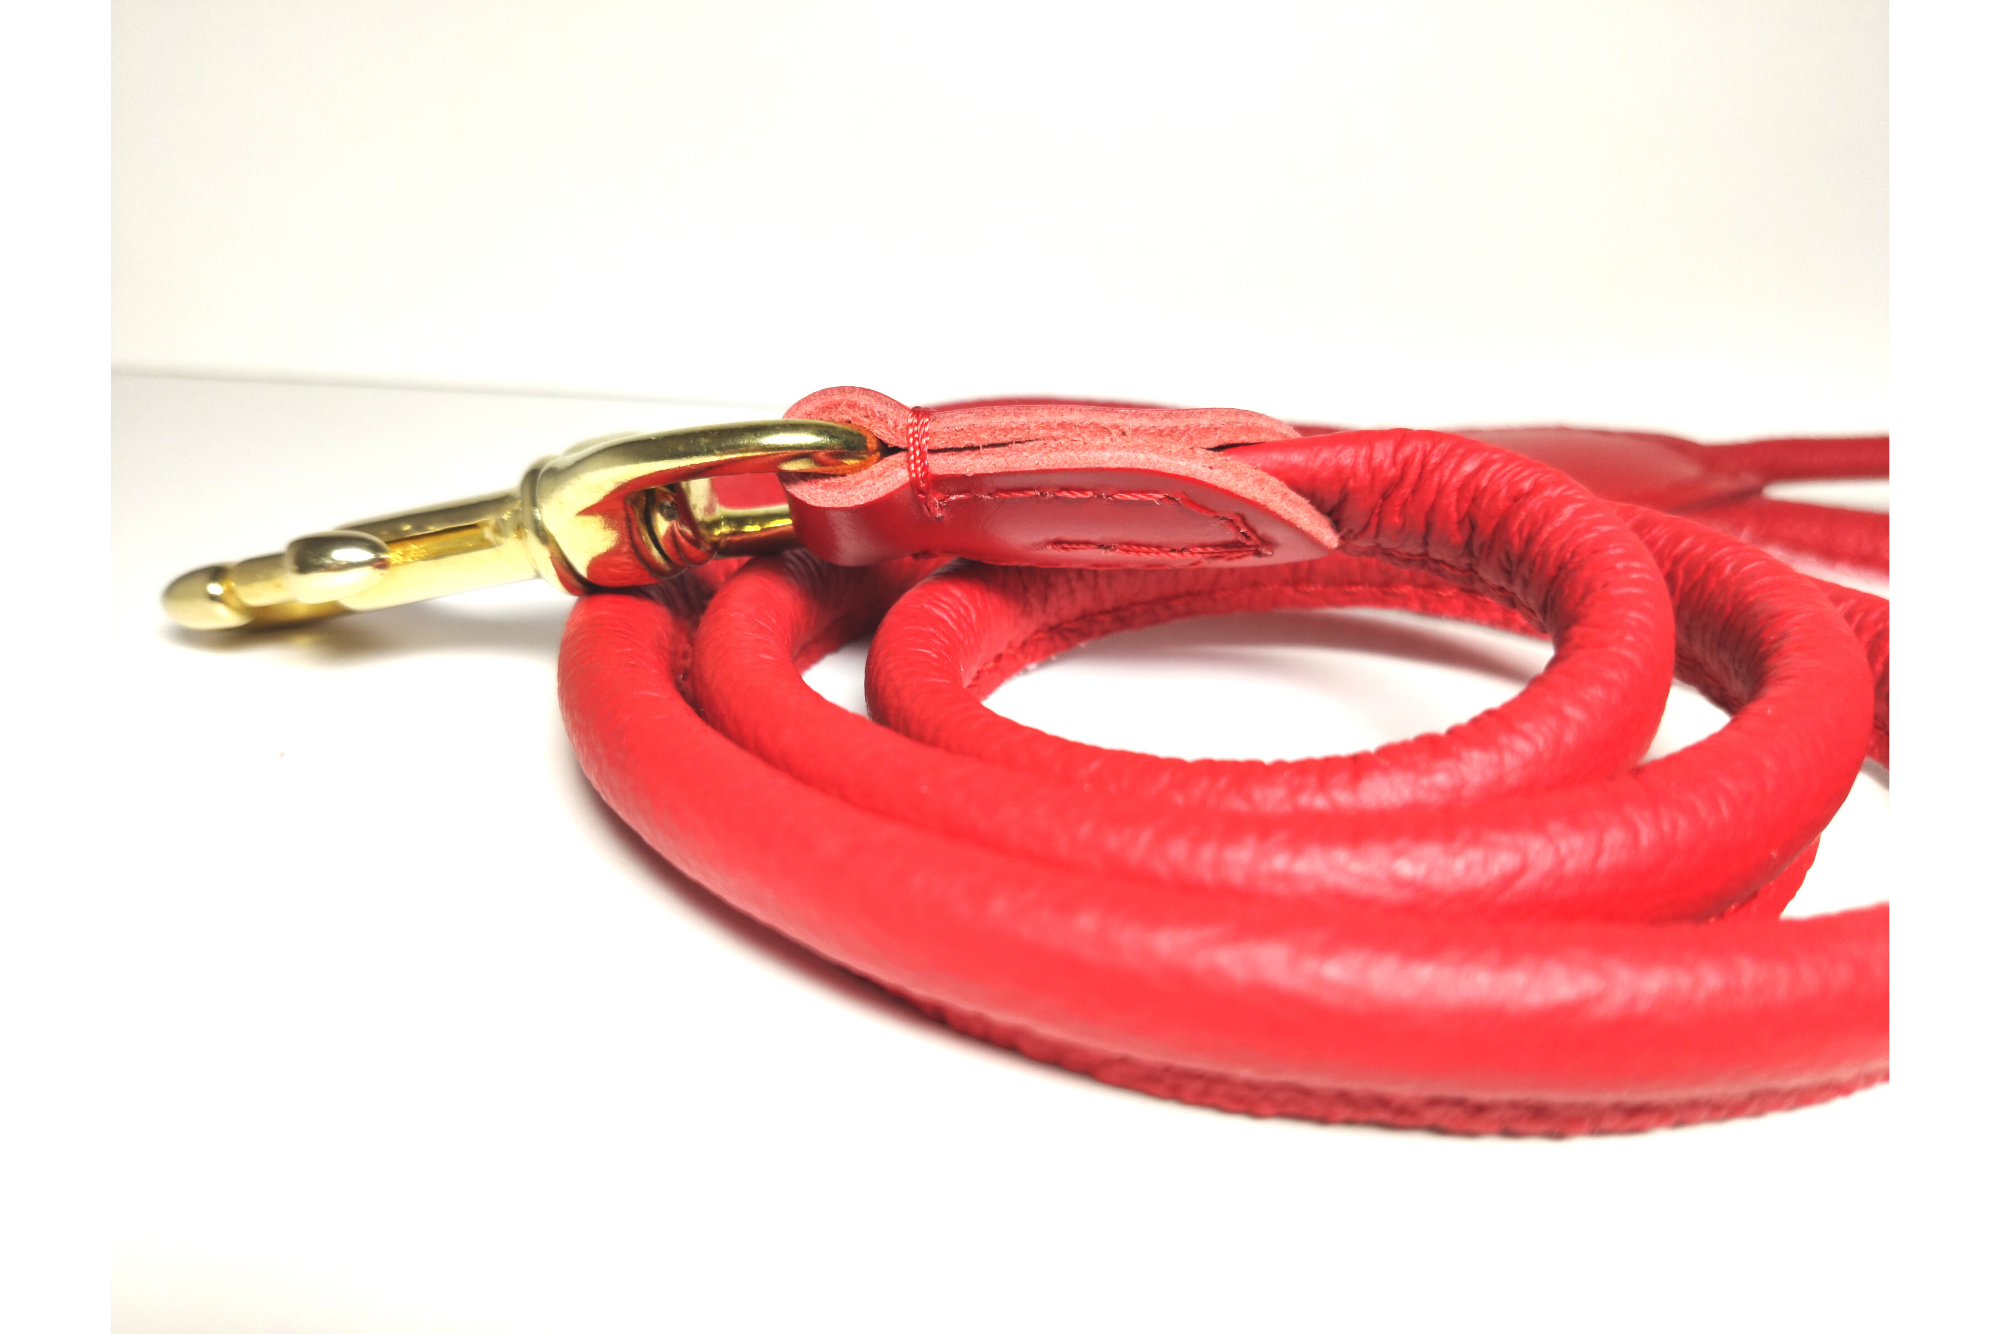 Hillfoot Rolled Leather Dog Leash - Red